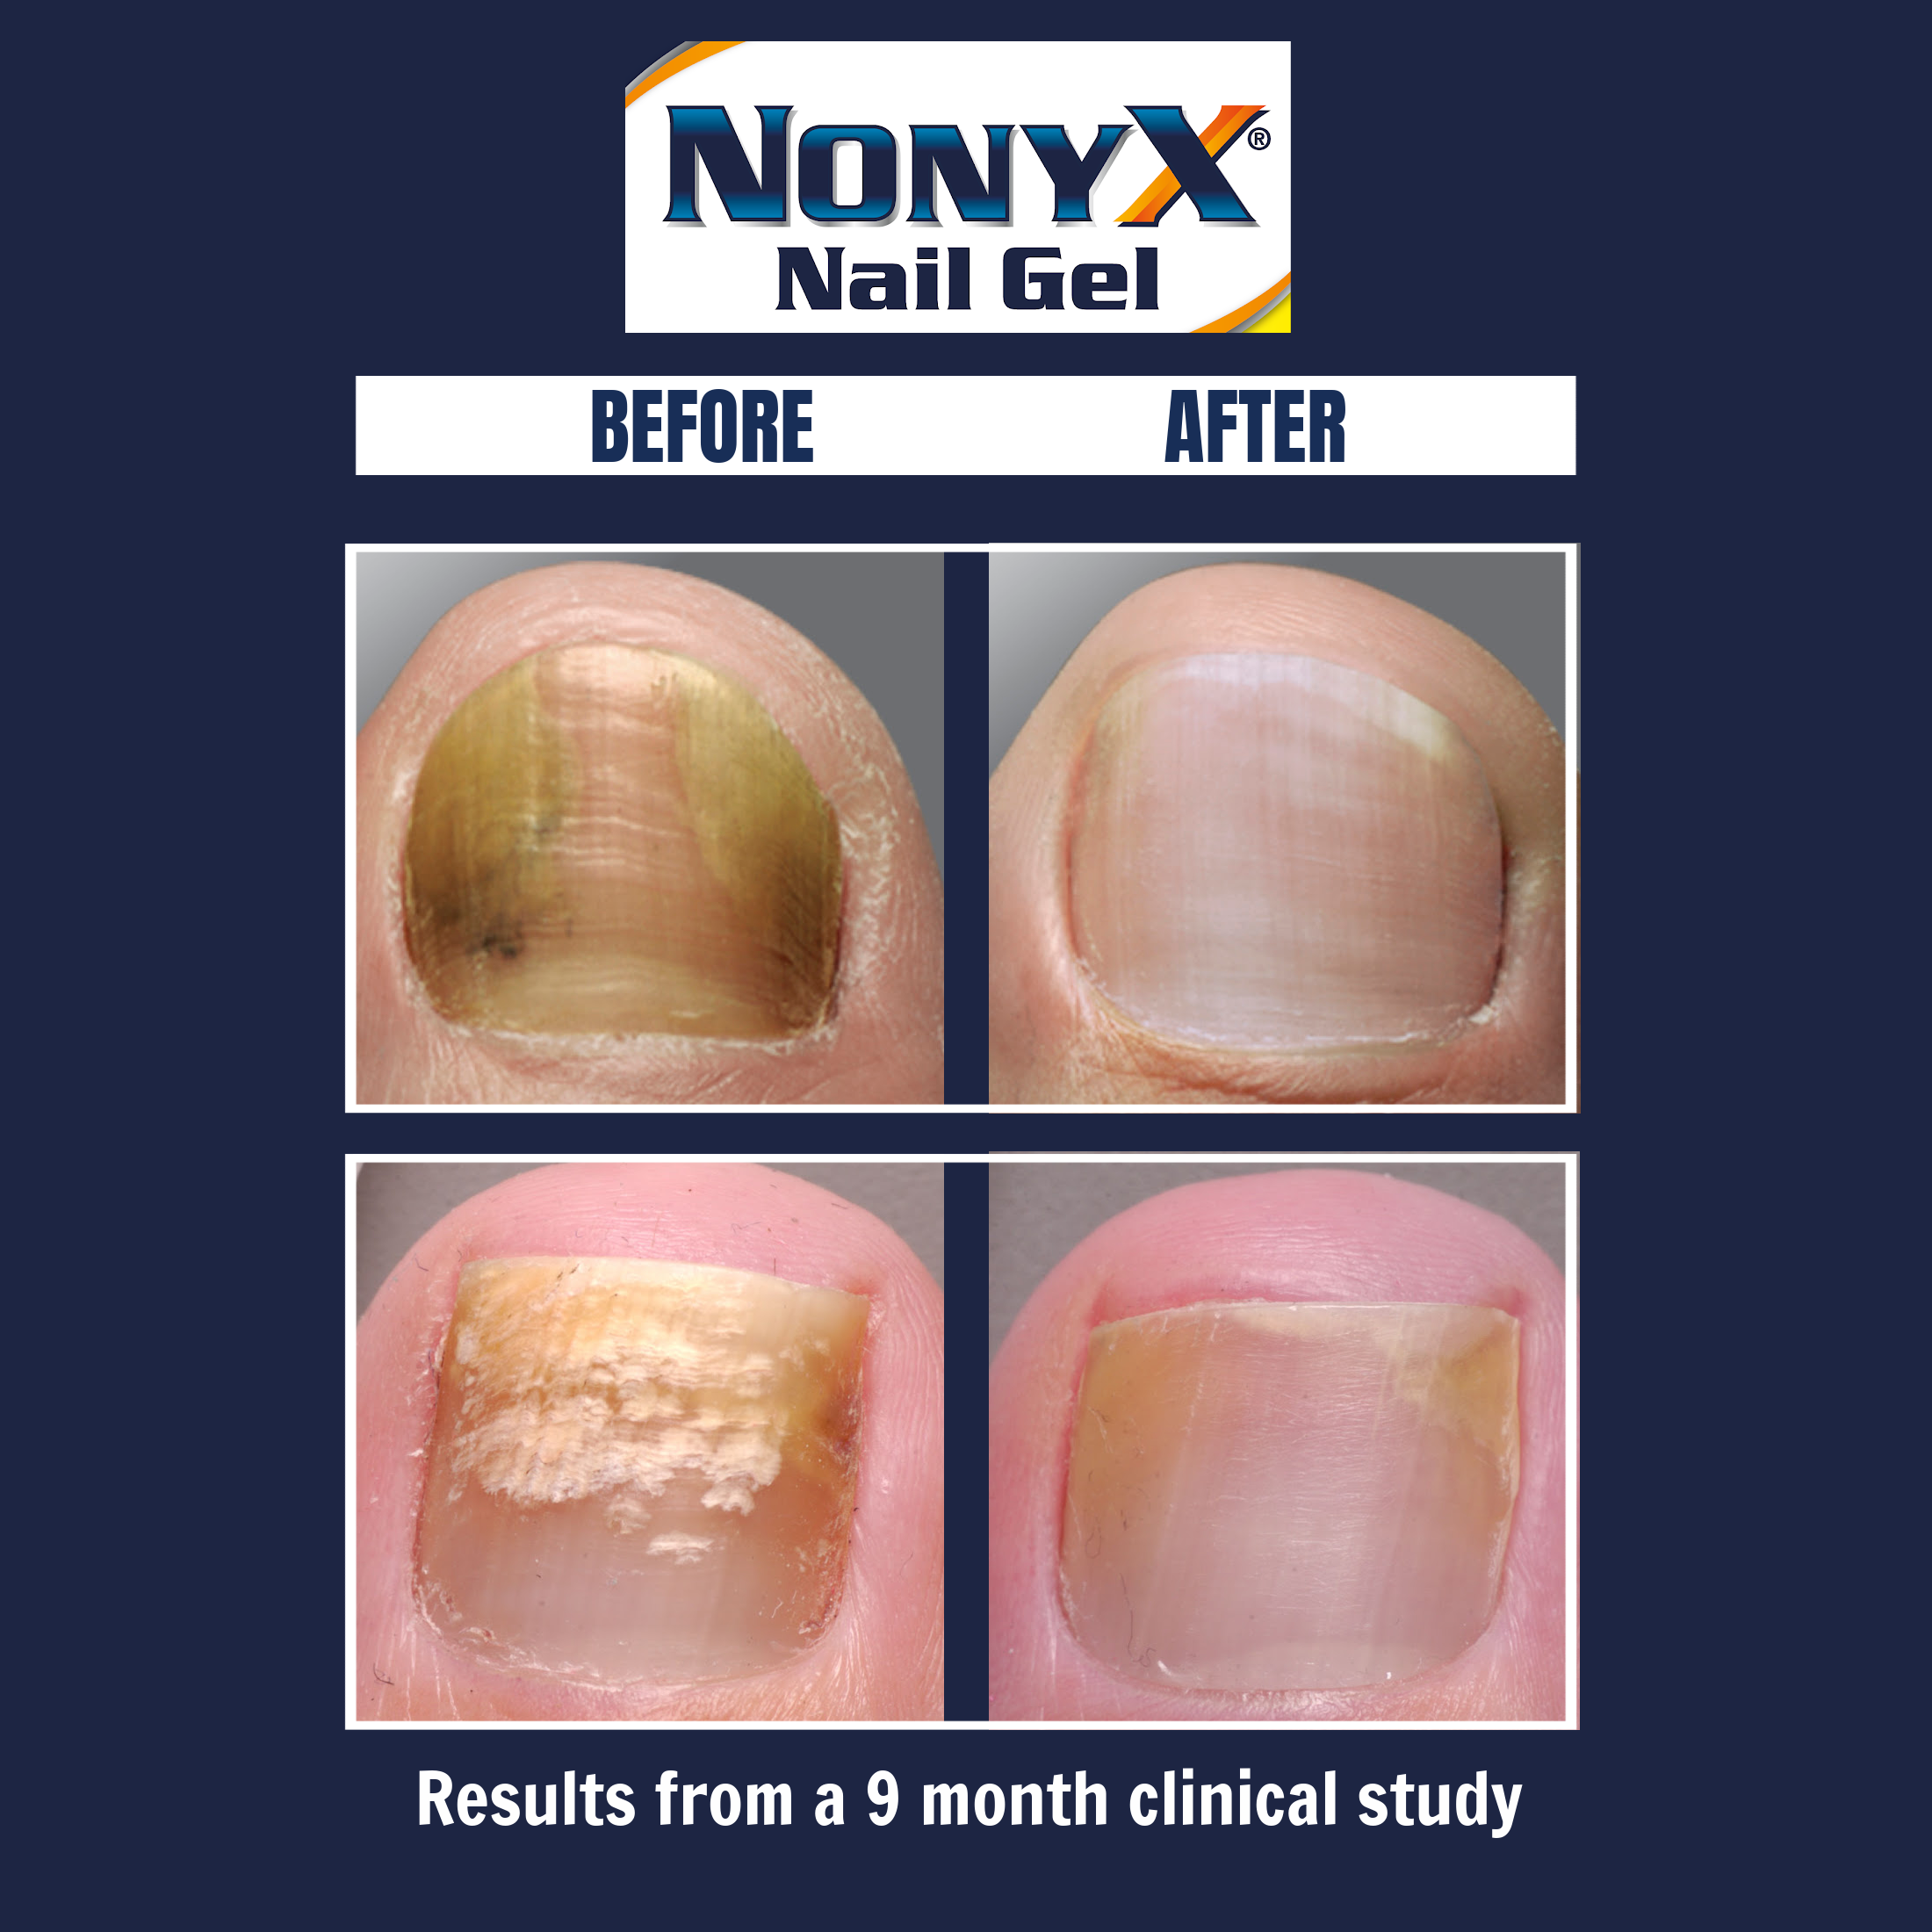 Nonyx Fungal Nail Clarifying Gel | Clinically Proven Effective for Fungus Damaged Toenails | Results are Money-back Guaranteed, 4 oz. - image 4 of 9